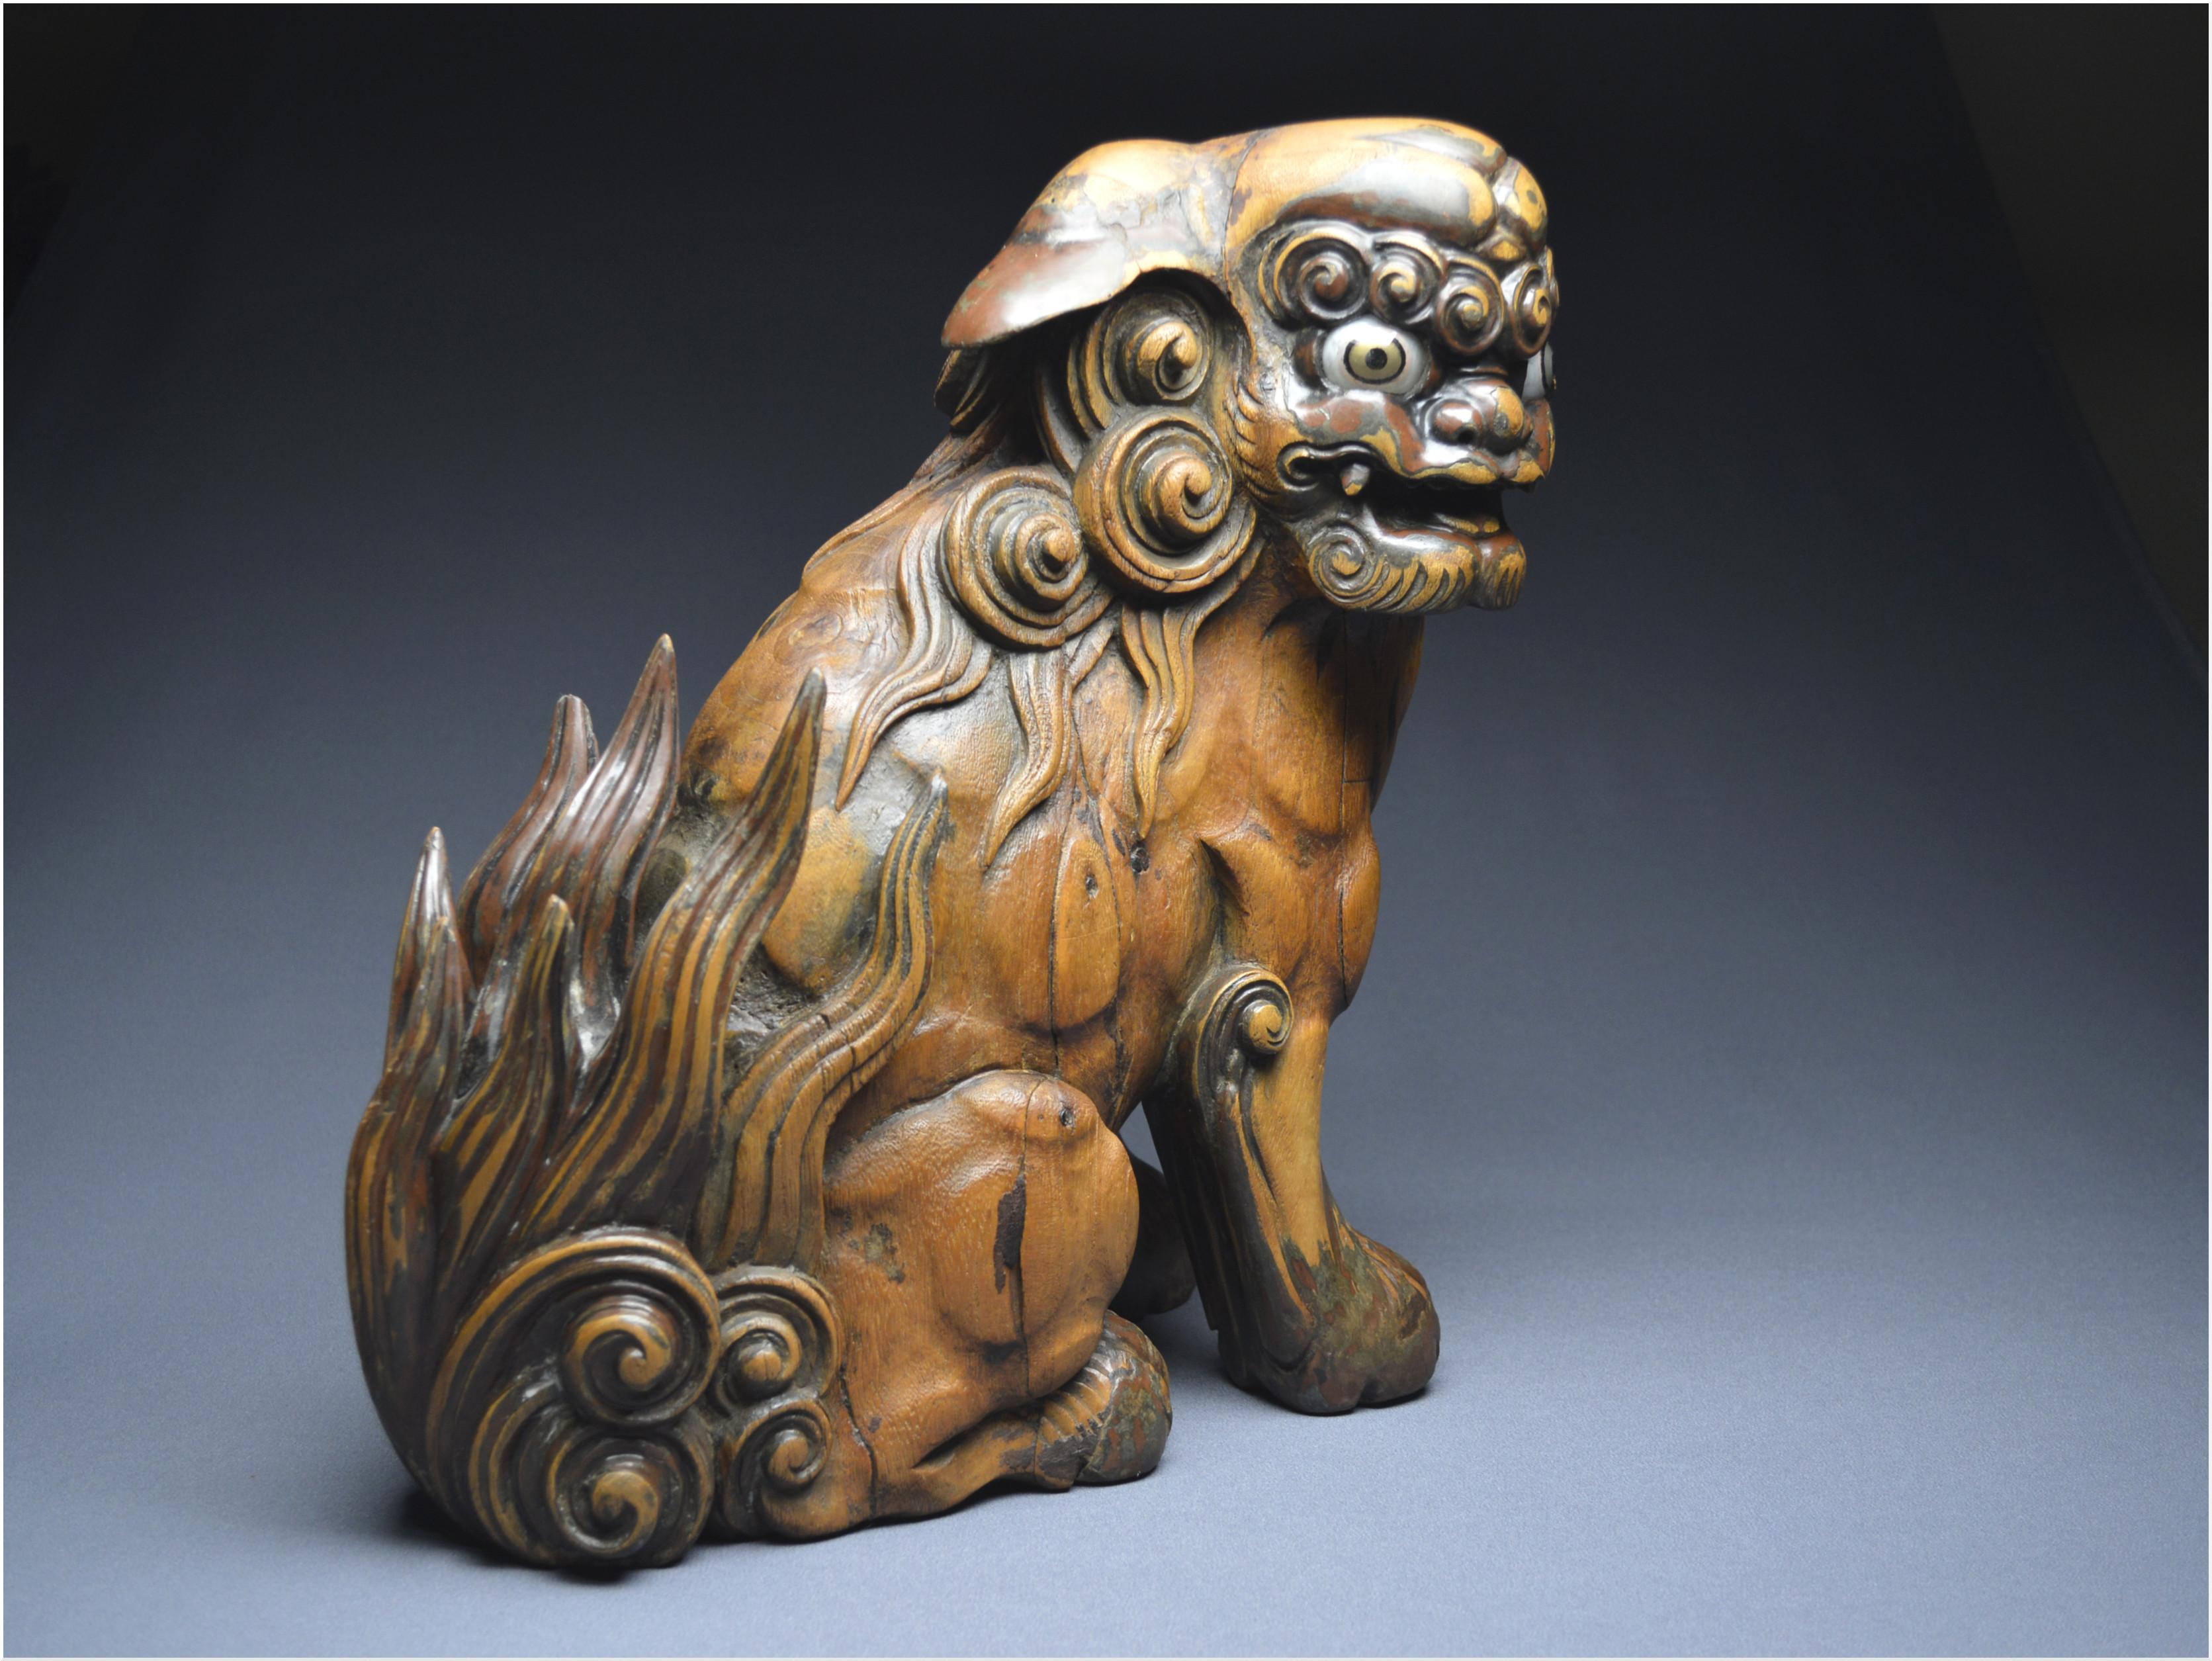 Japan, Edo Period (1603 - 1867), Massive wooden komainu with traces of laquer 5